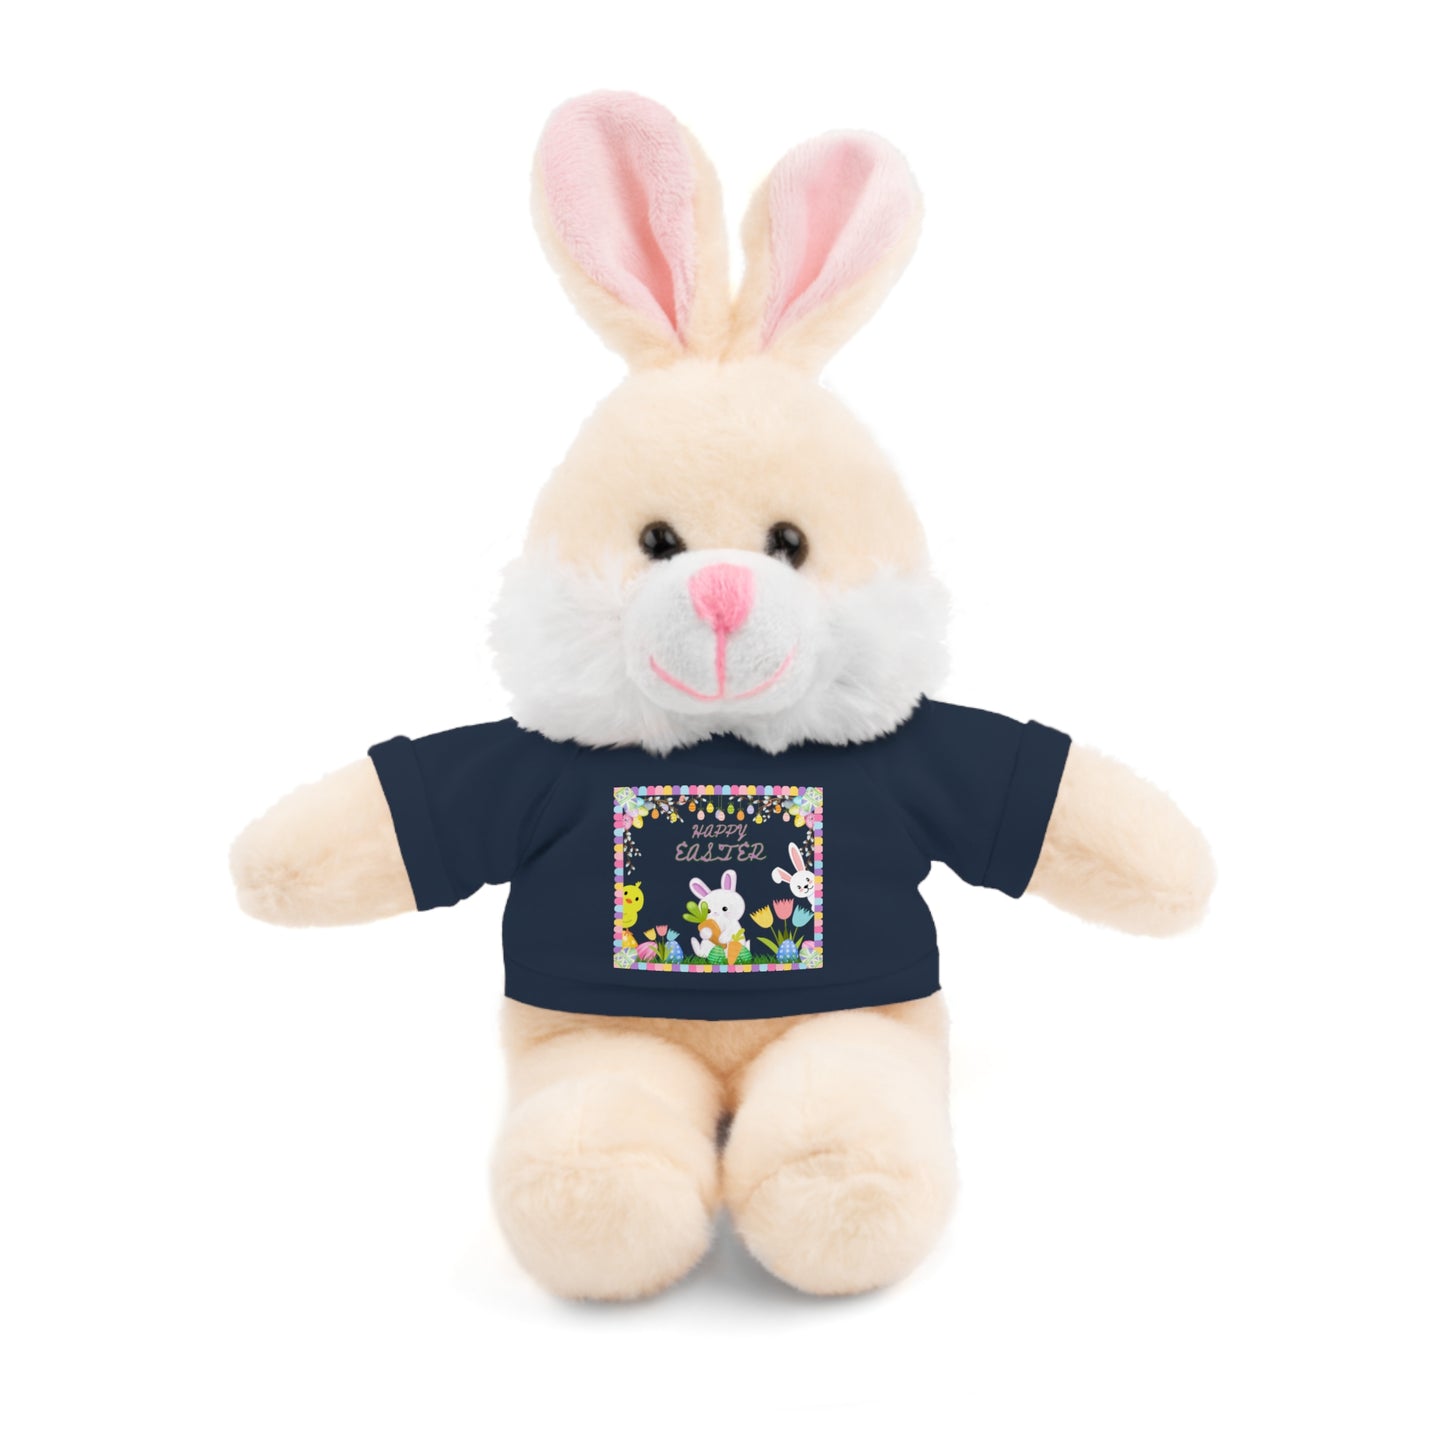 " Happy Easter" Stuffed Animals with Tee, Bunny and Lamb